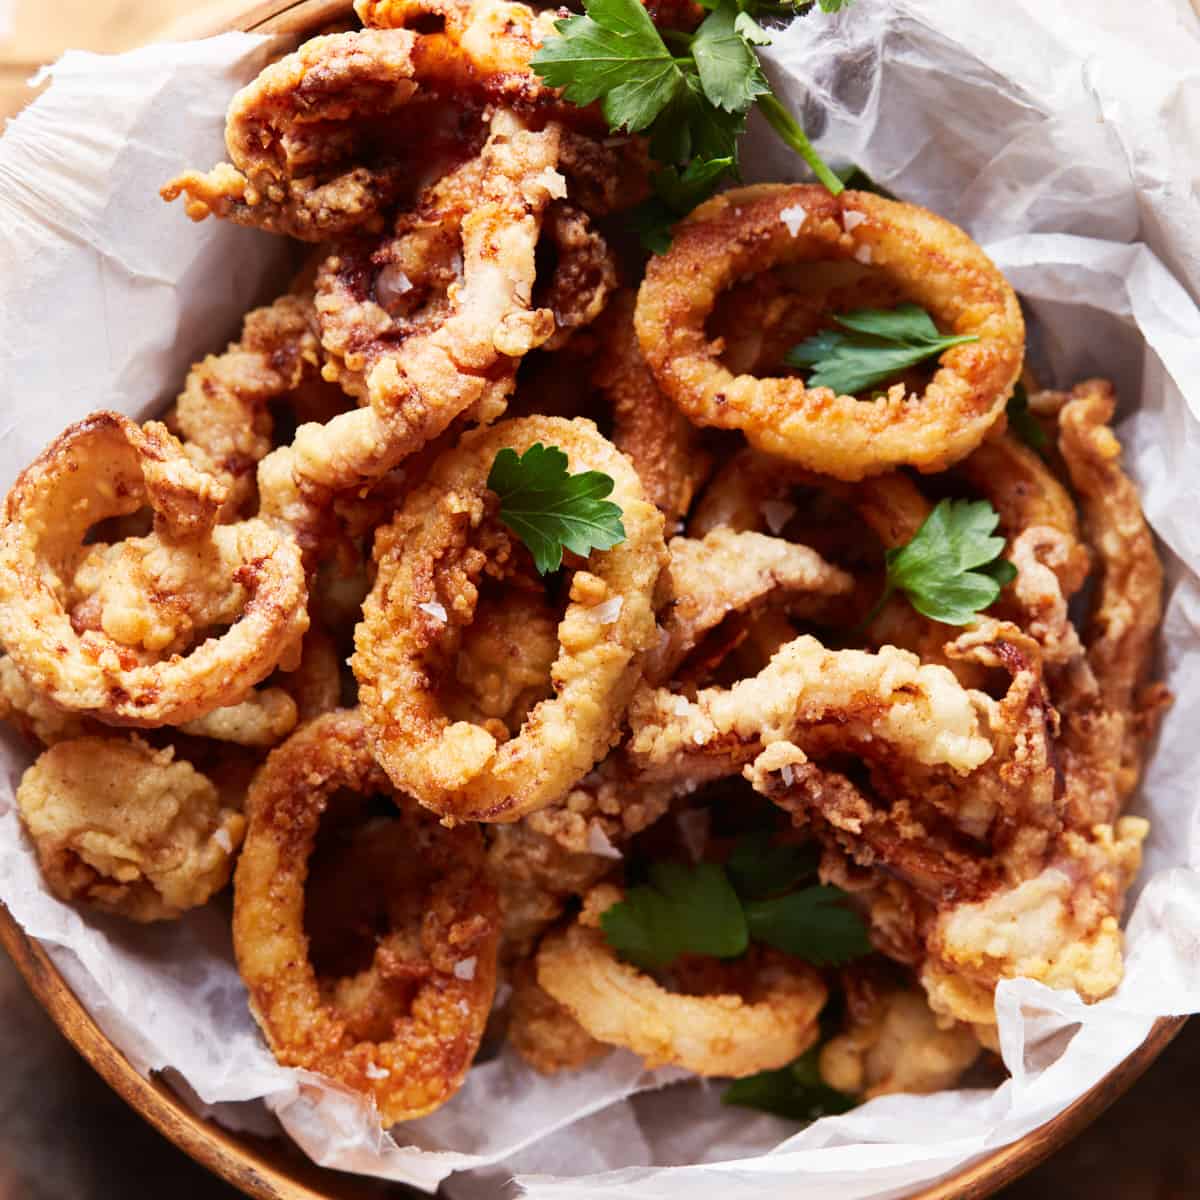 Fried calamari on a round tray with herbs